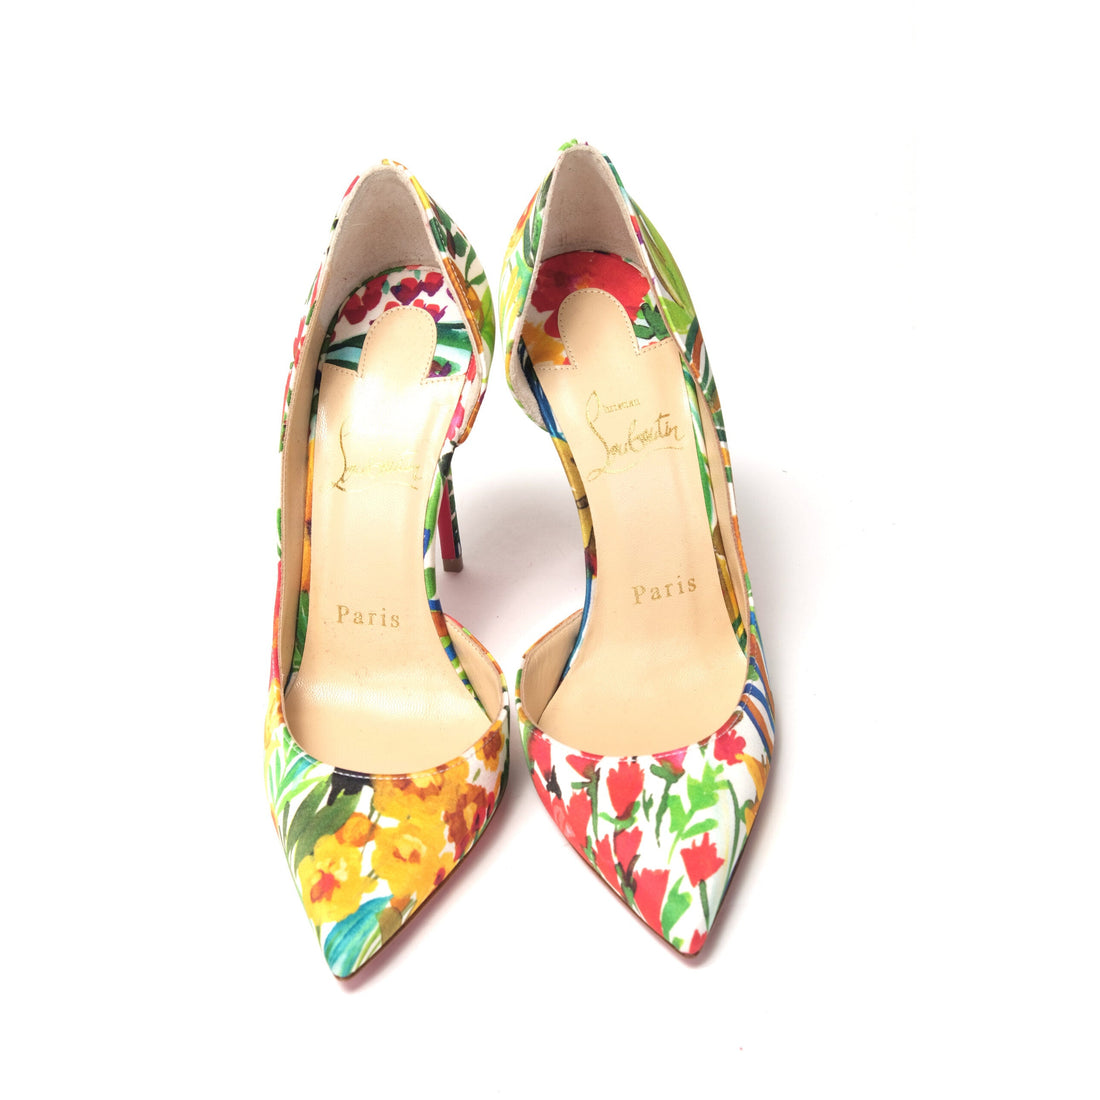 Christian Louboutin Multicolor Flower Printed High Heels Pumps Shoes